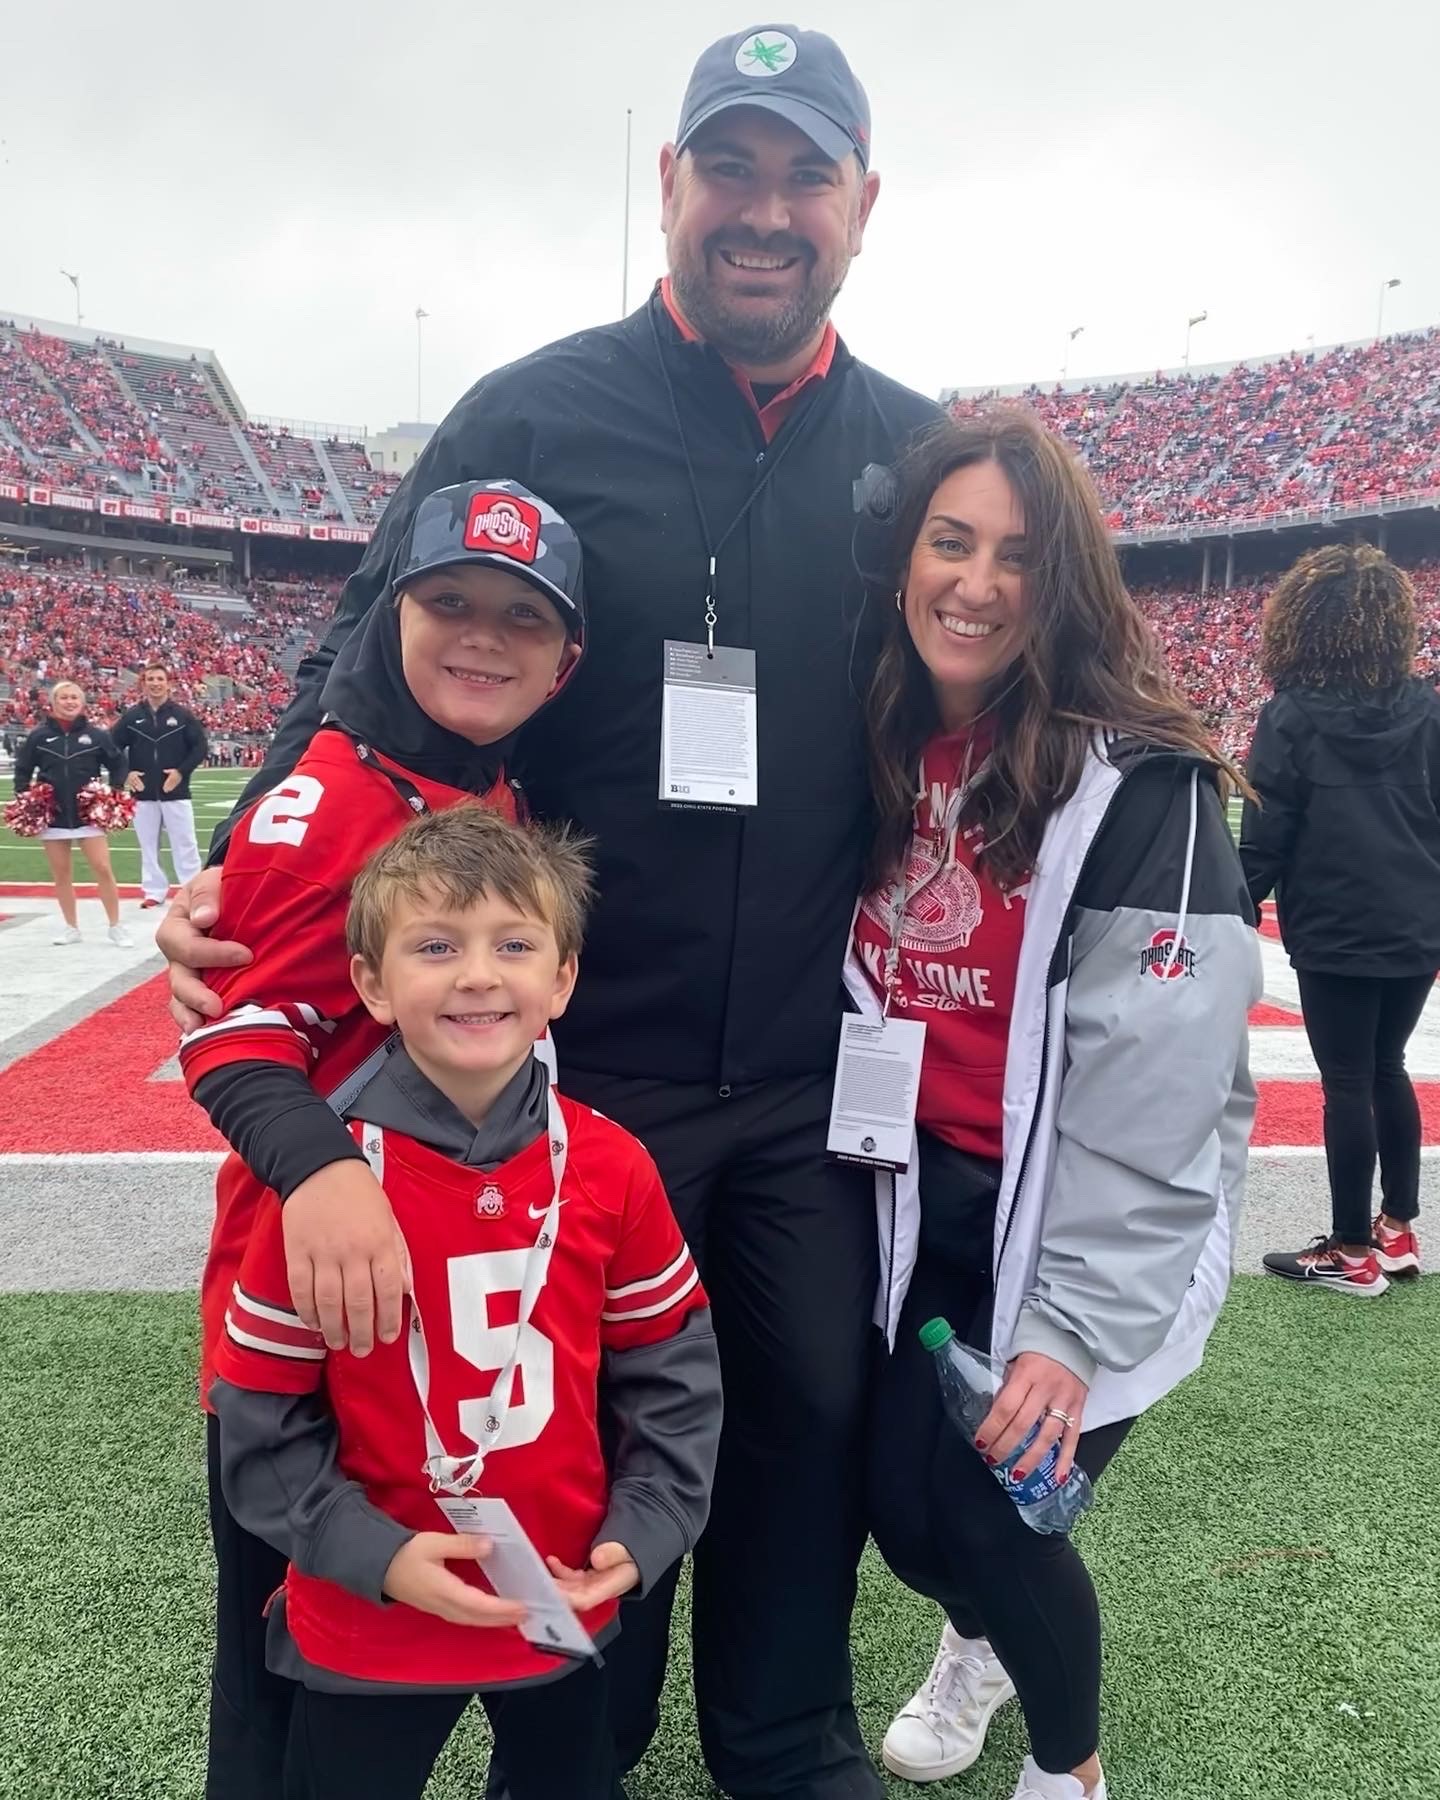 Justin Kume, his wife, and two sons pose in Ohio State gear at the Ohio State football game. 